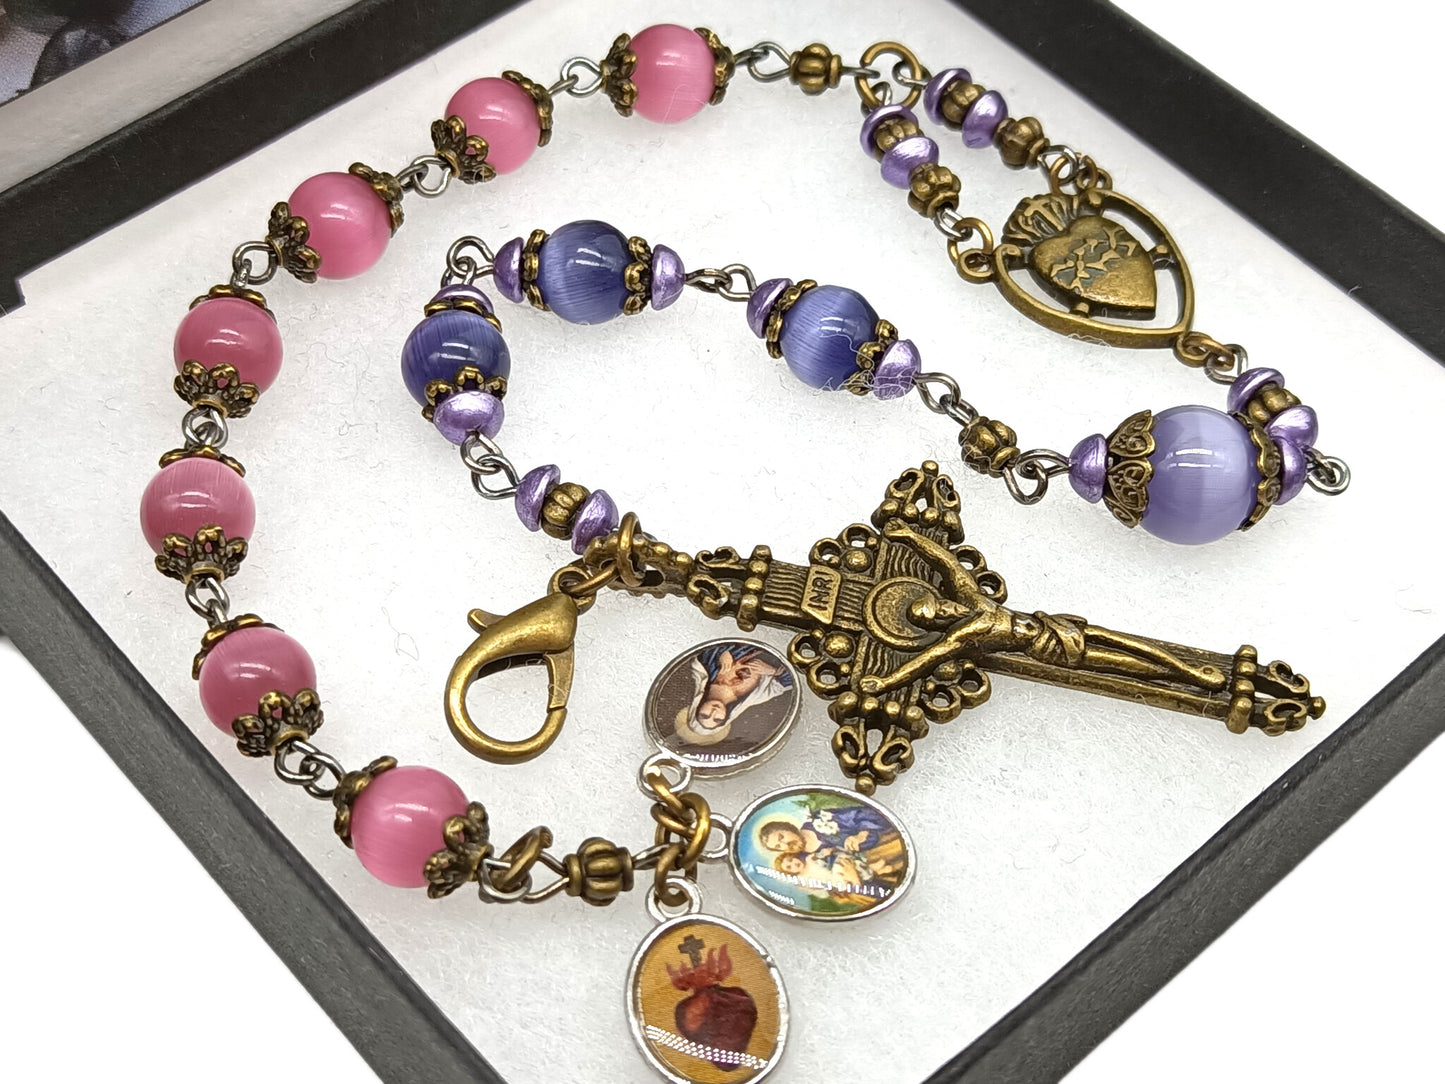 Pocket servite unique dolor rosary in pink and blue glass beads and bronze crucifix and medal.